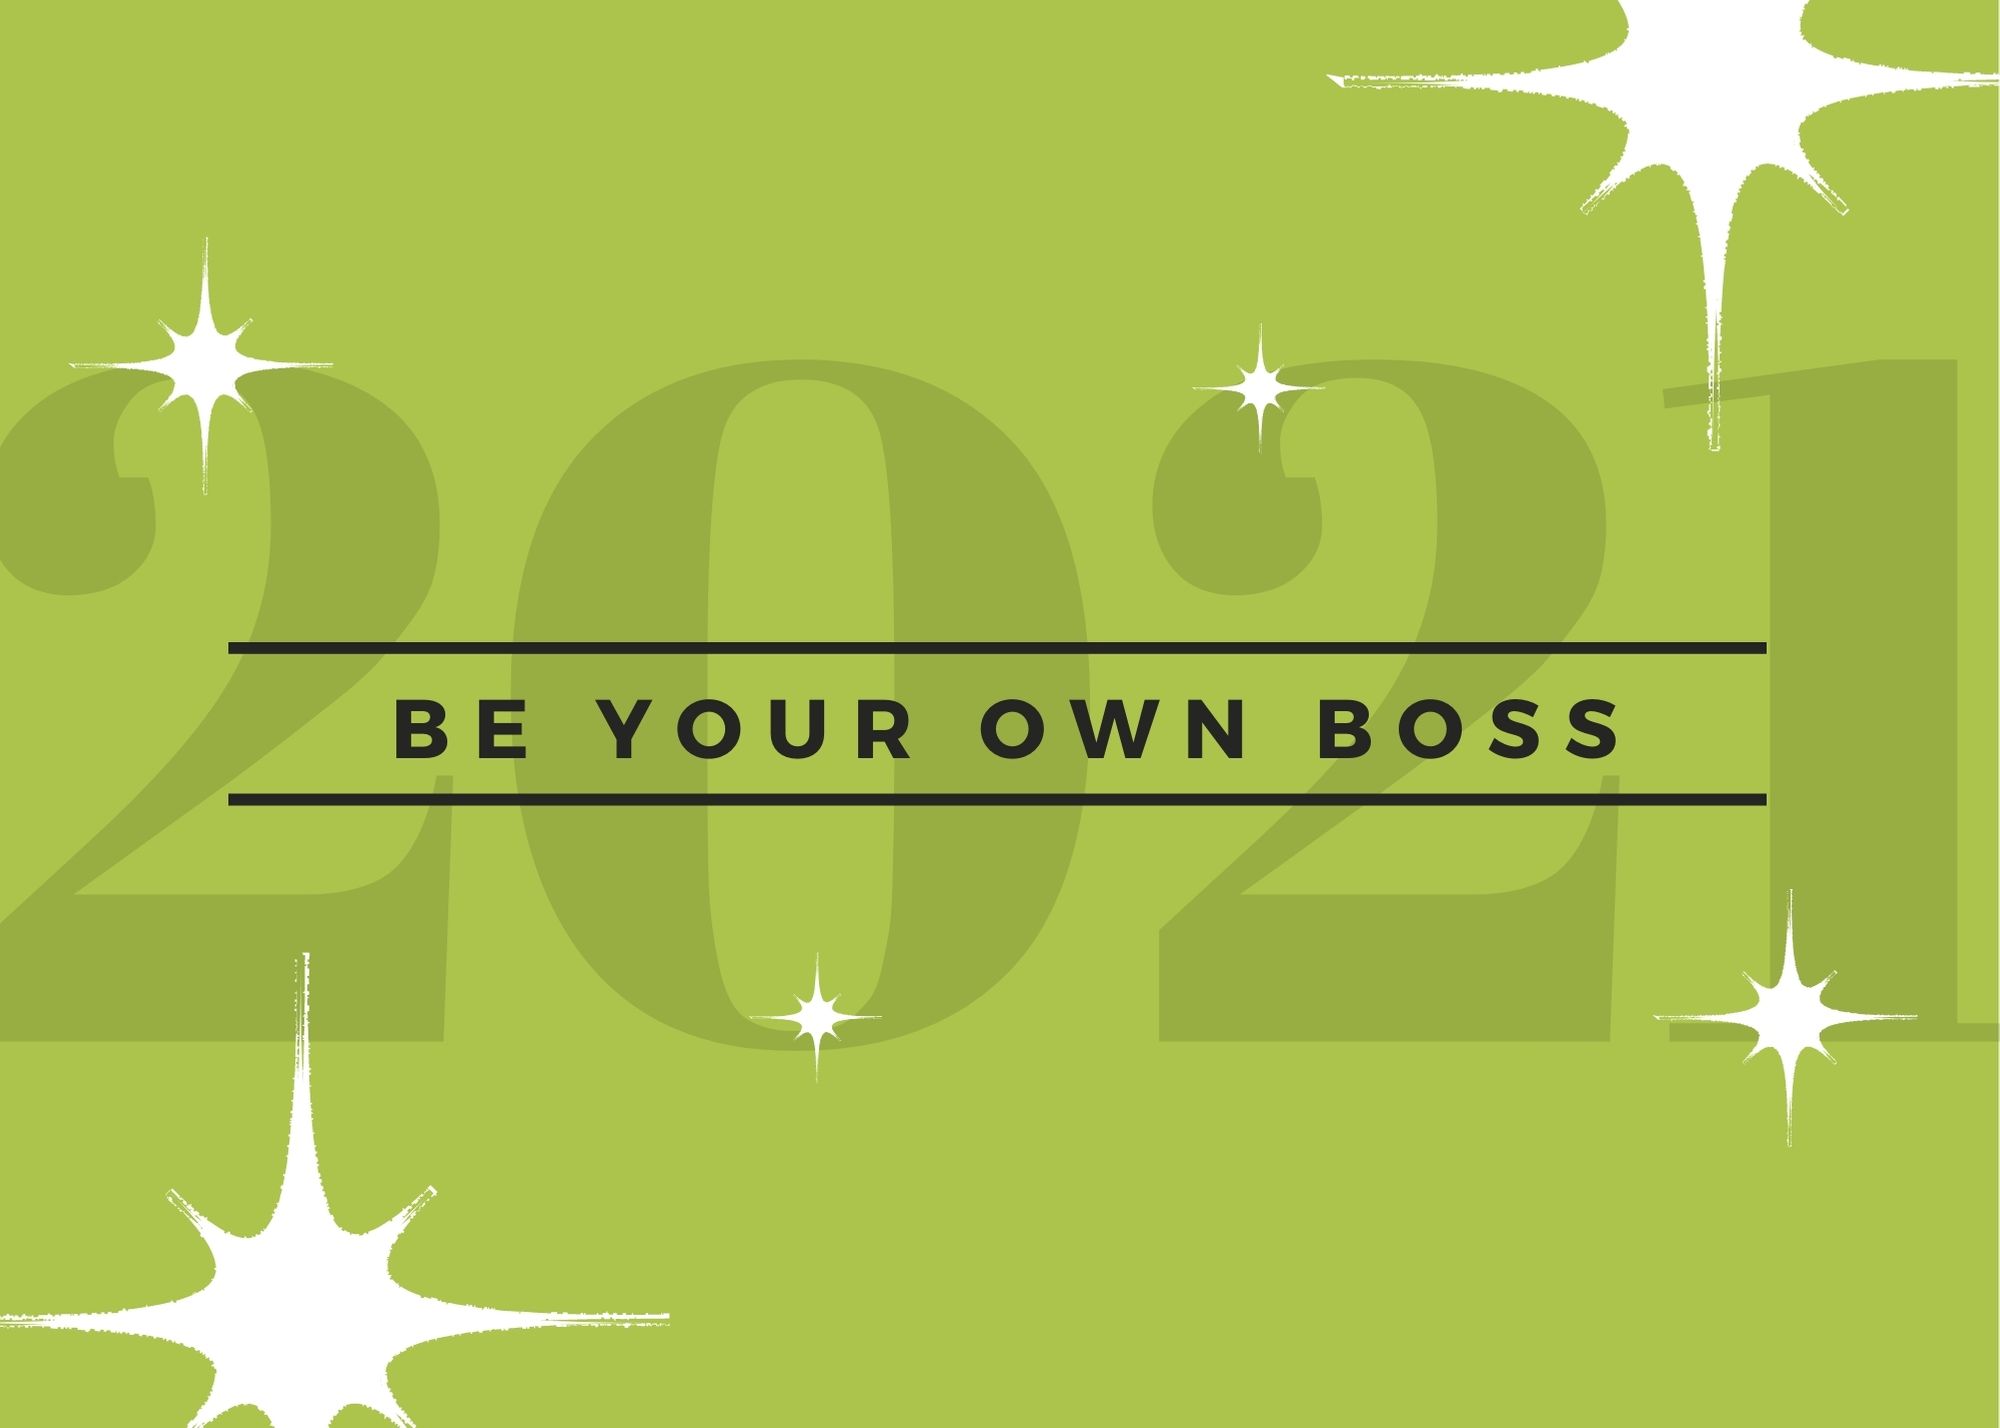 image stating be your own boss on green background